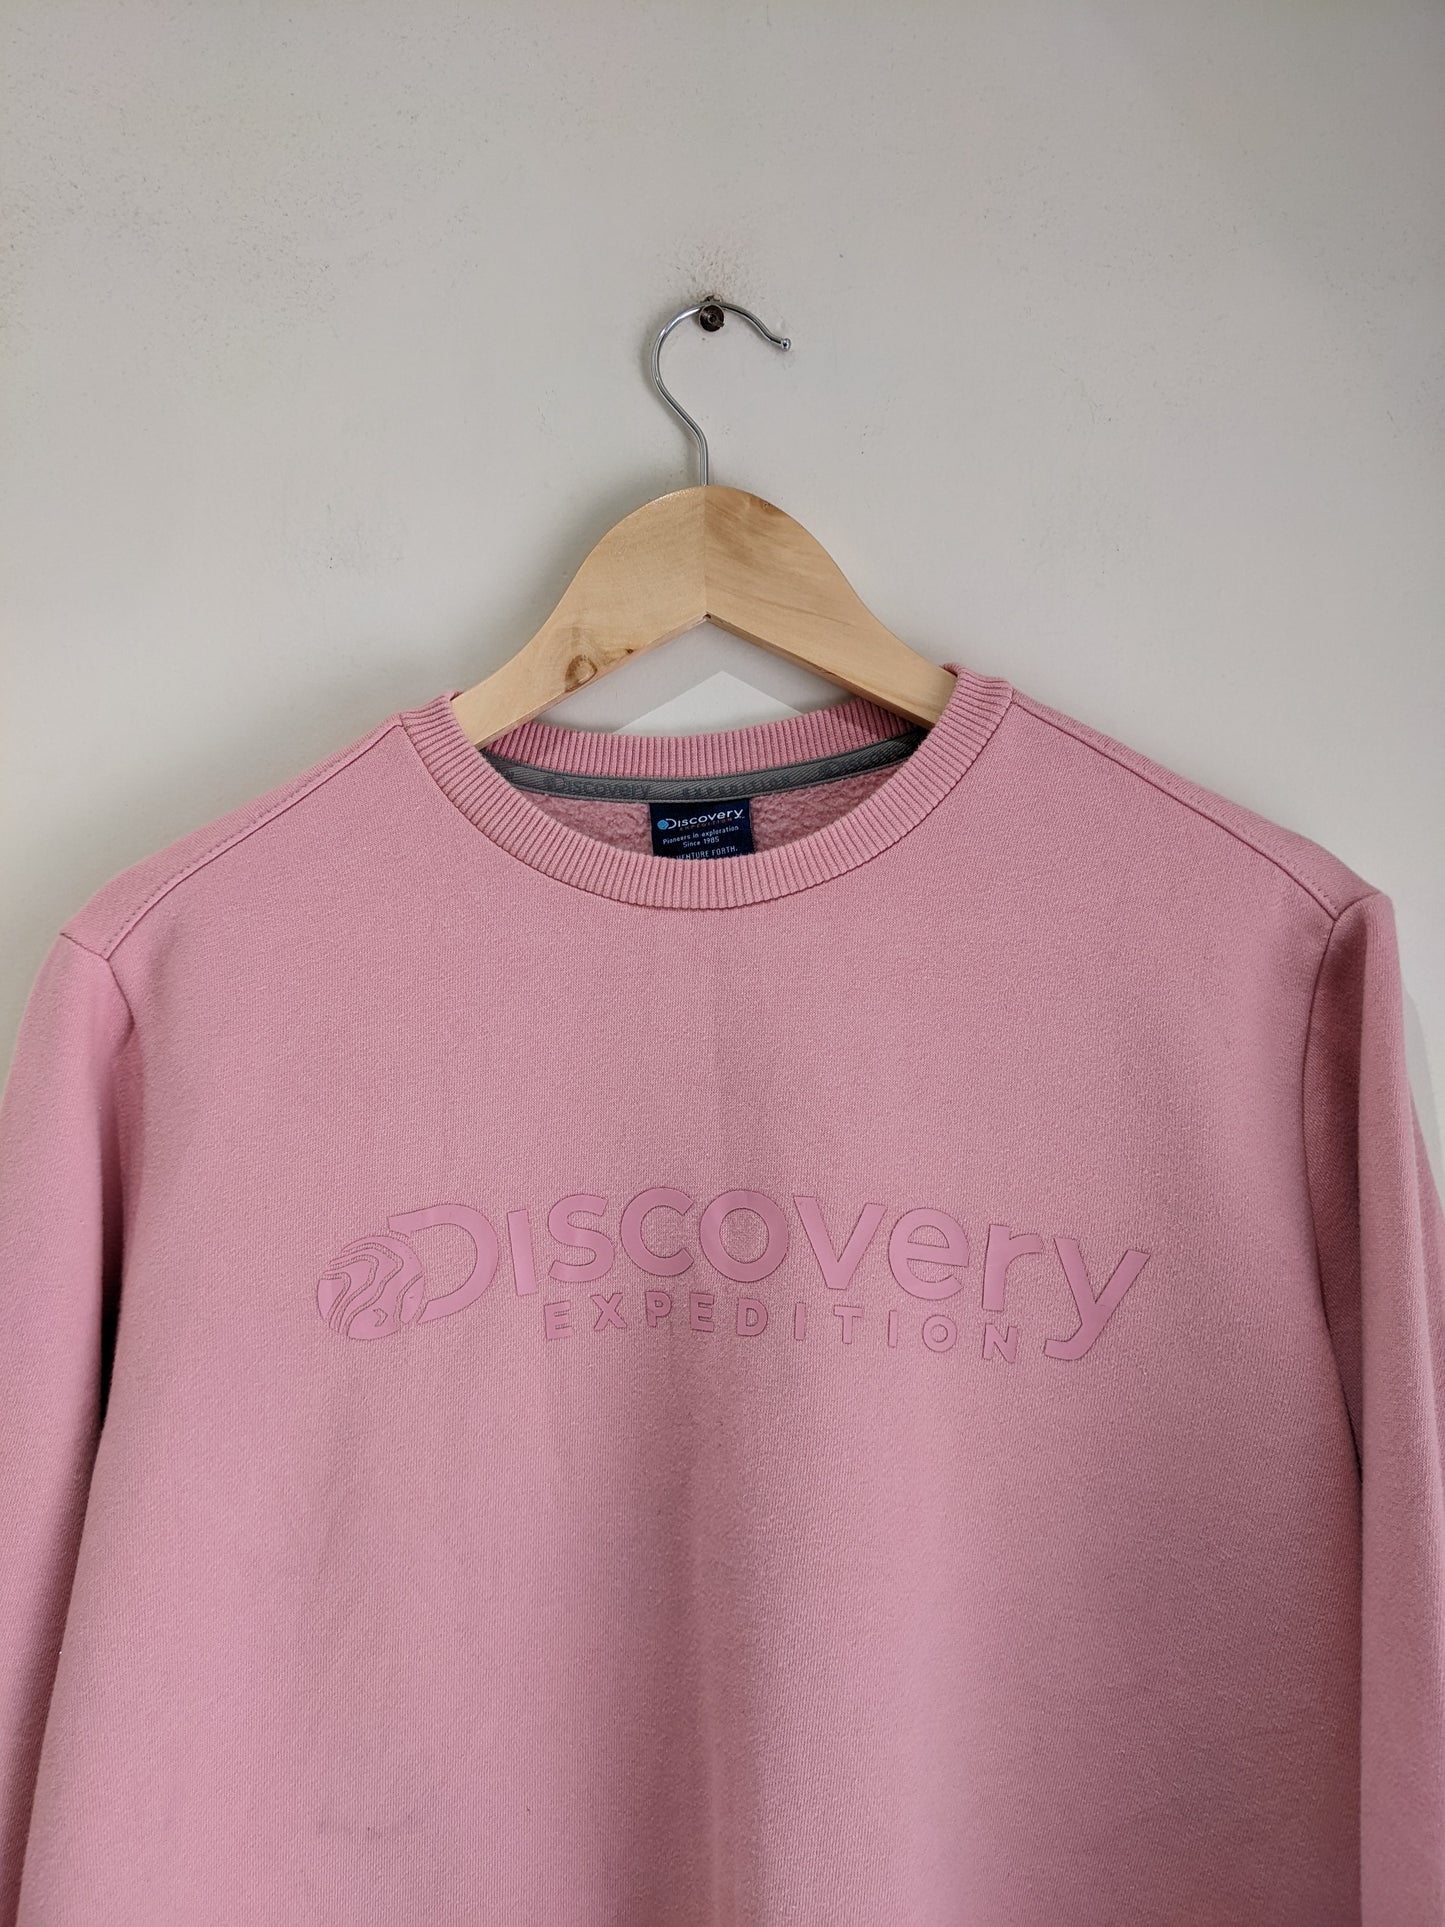 Discovery Expedition Pink Sweatshirt